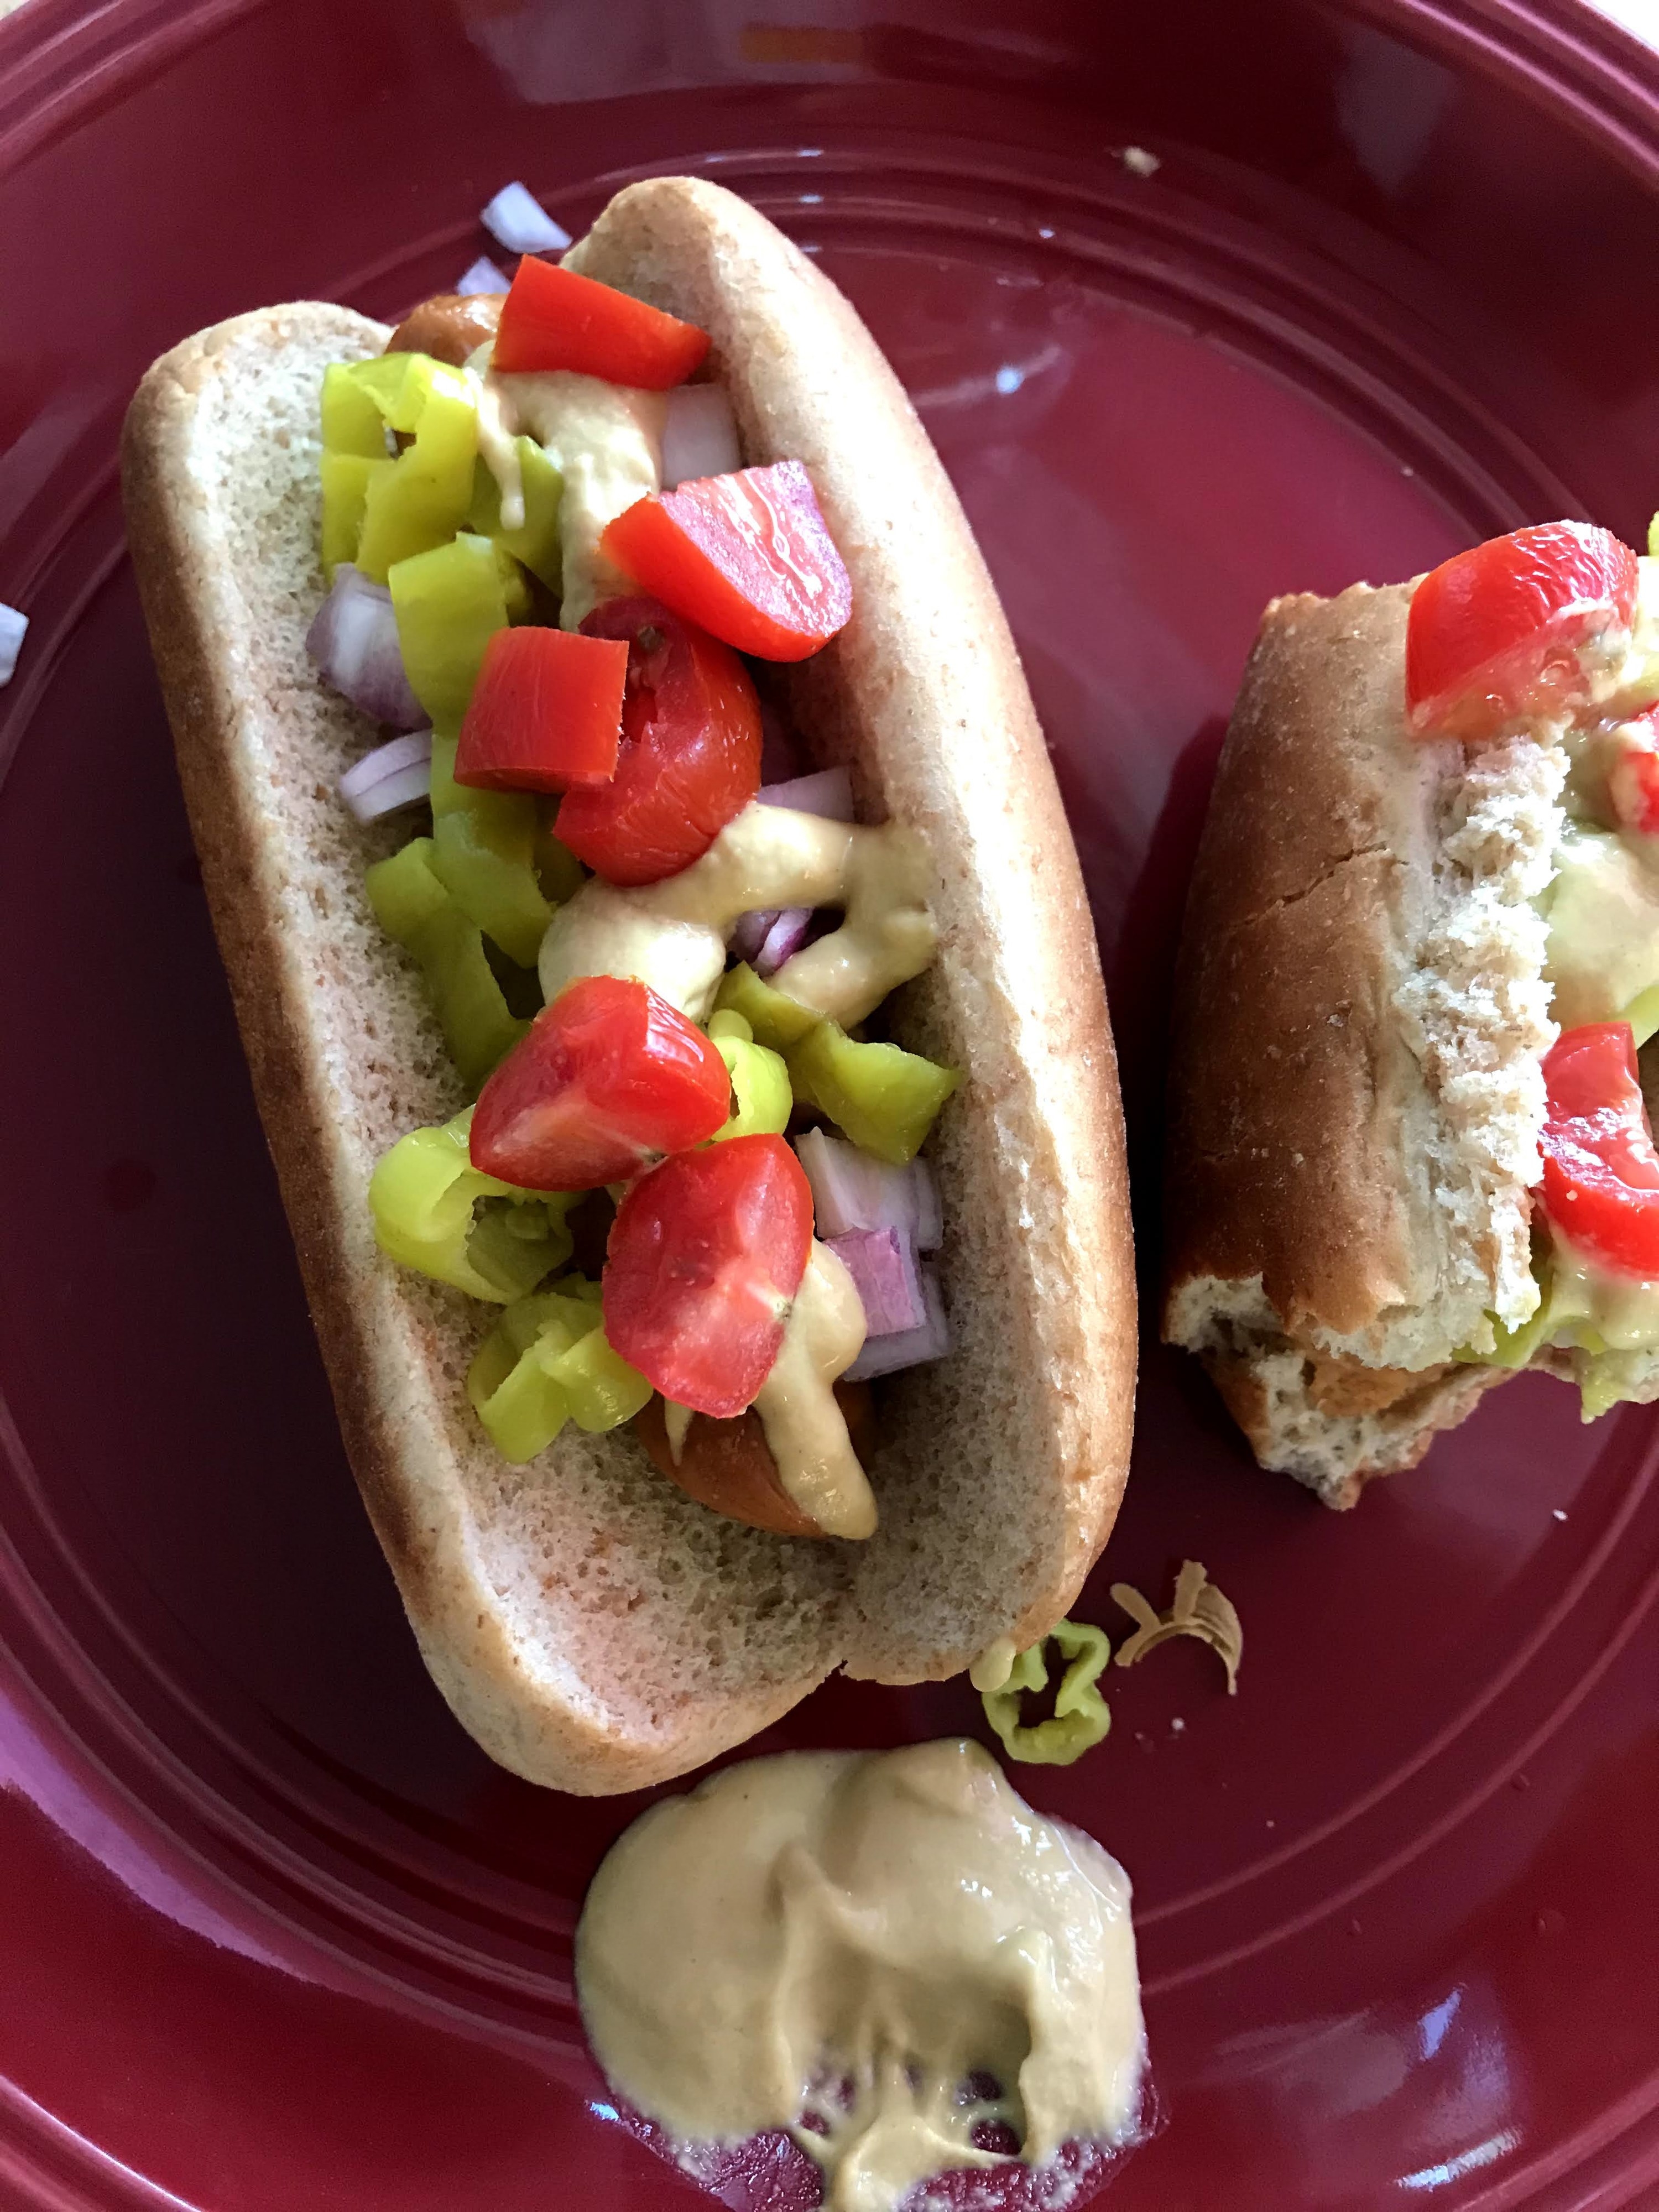 Two hot dogs on a plate